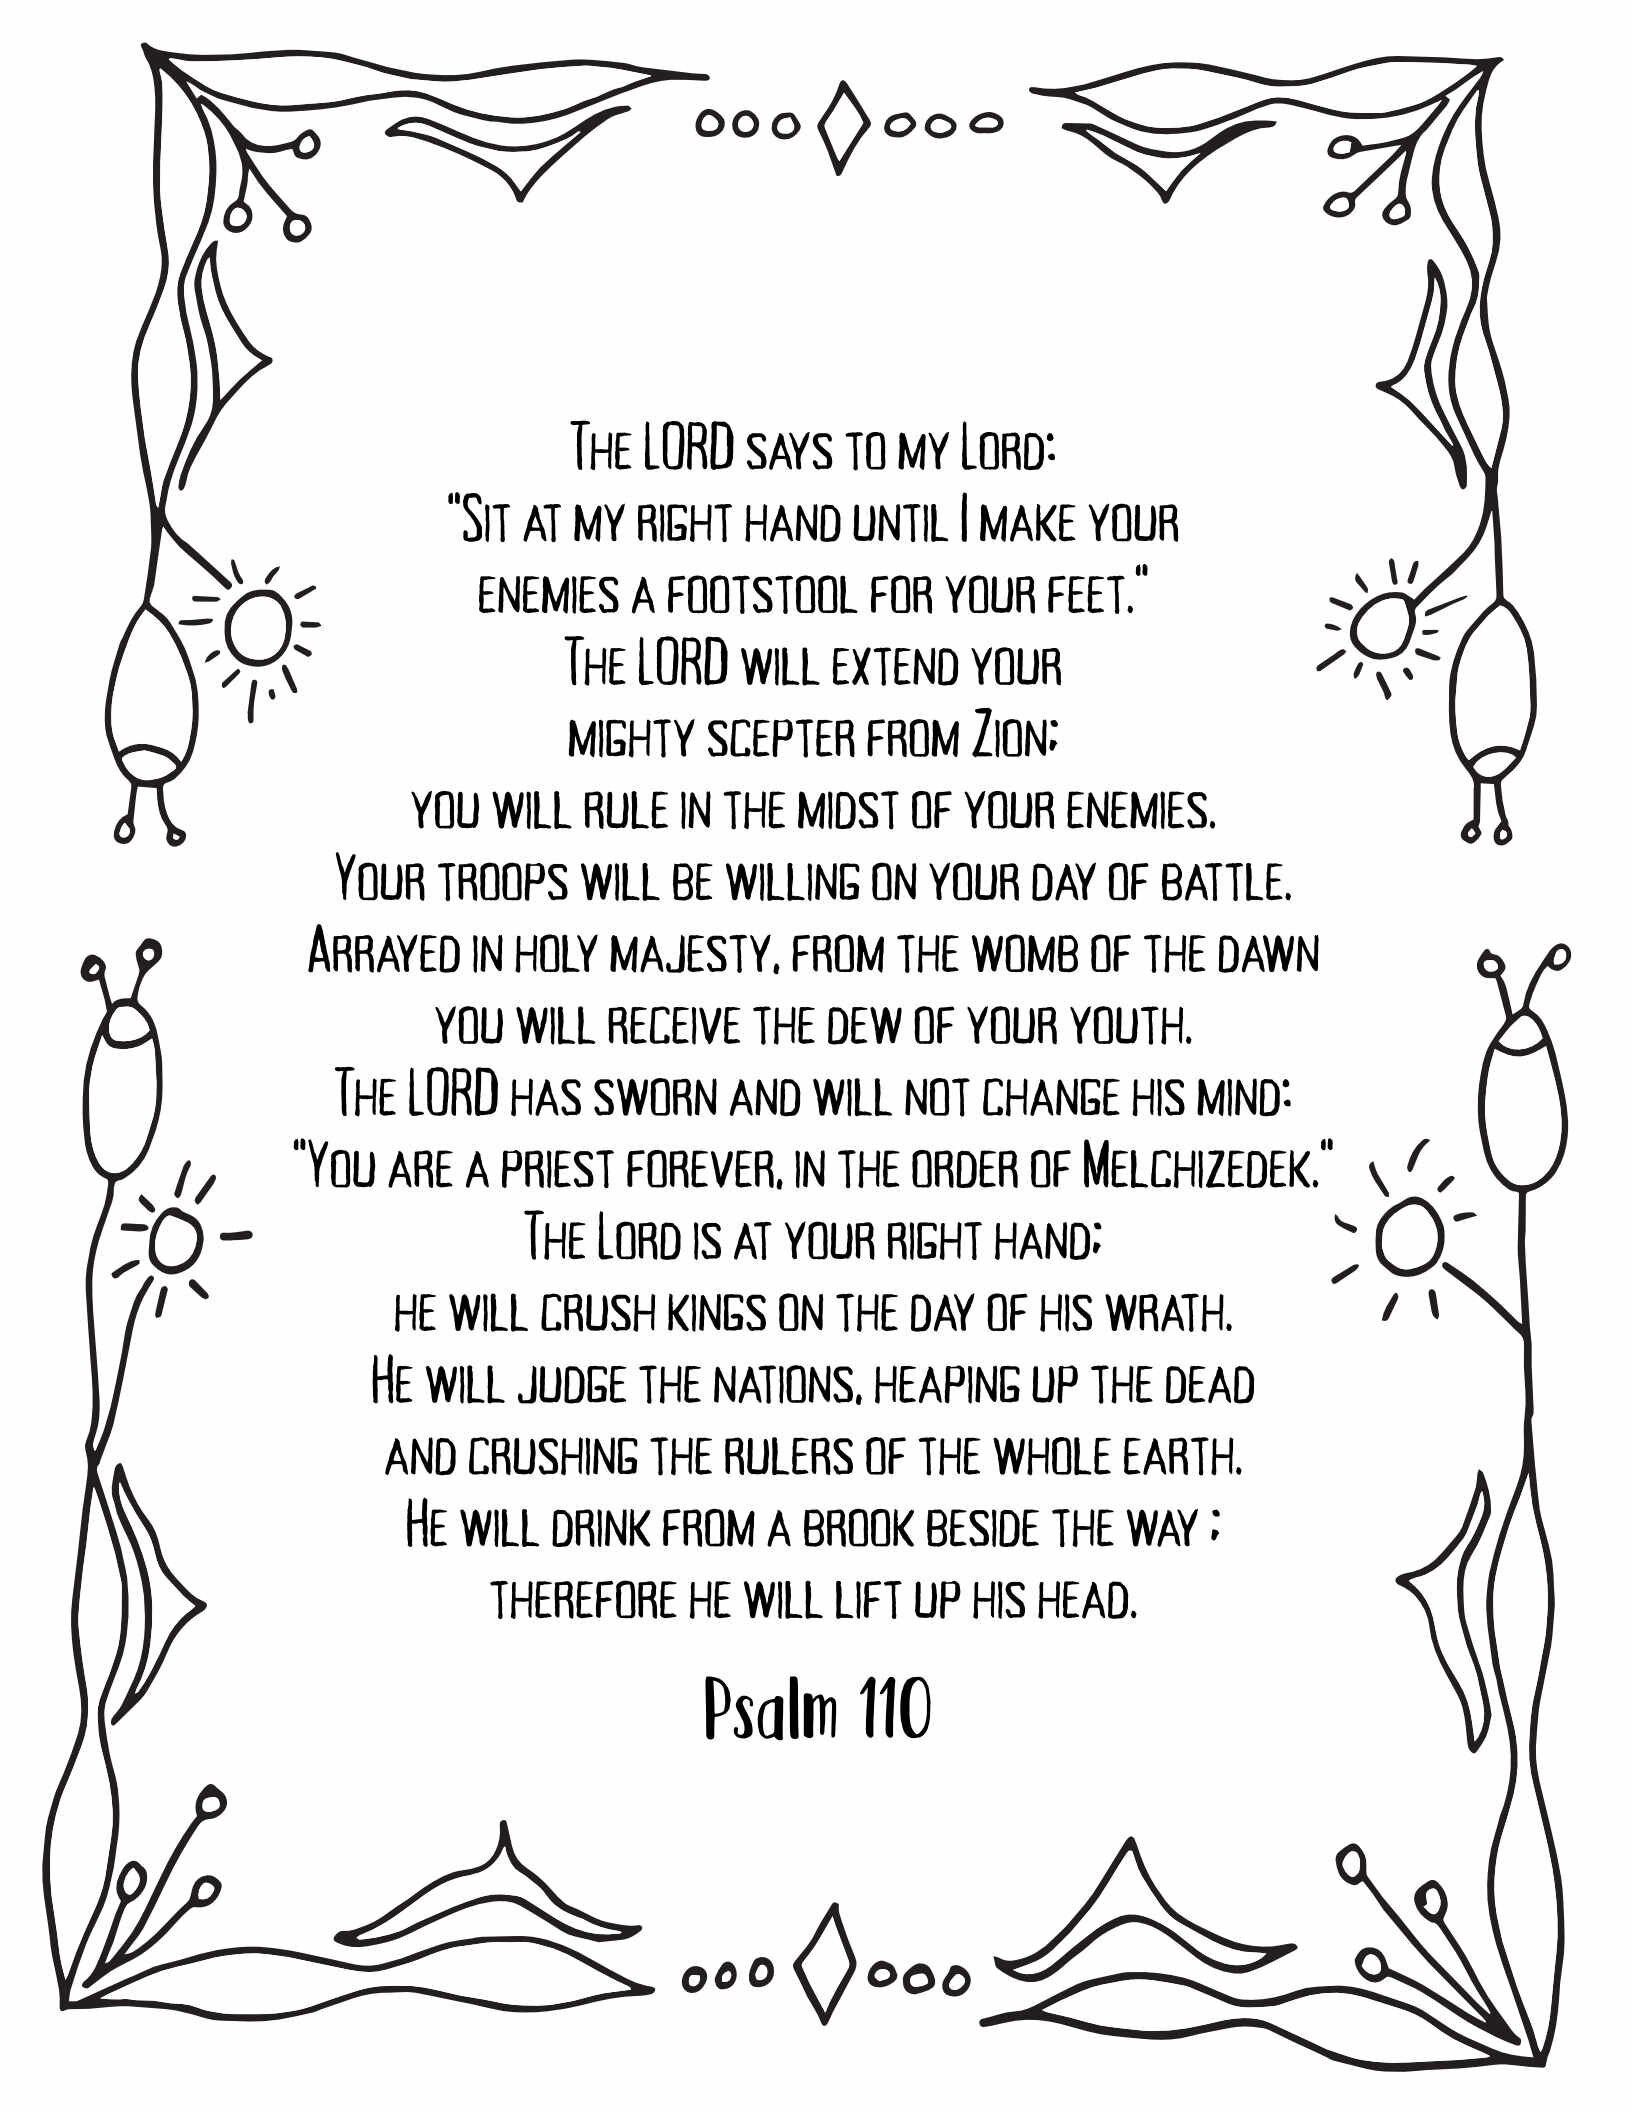 10 Free Printable Psalm Coloring Pages - Download and Color Adult Scripture - Psalm 110CLICK HERE TO DOWNLOAD THIS PAGE FREE